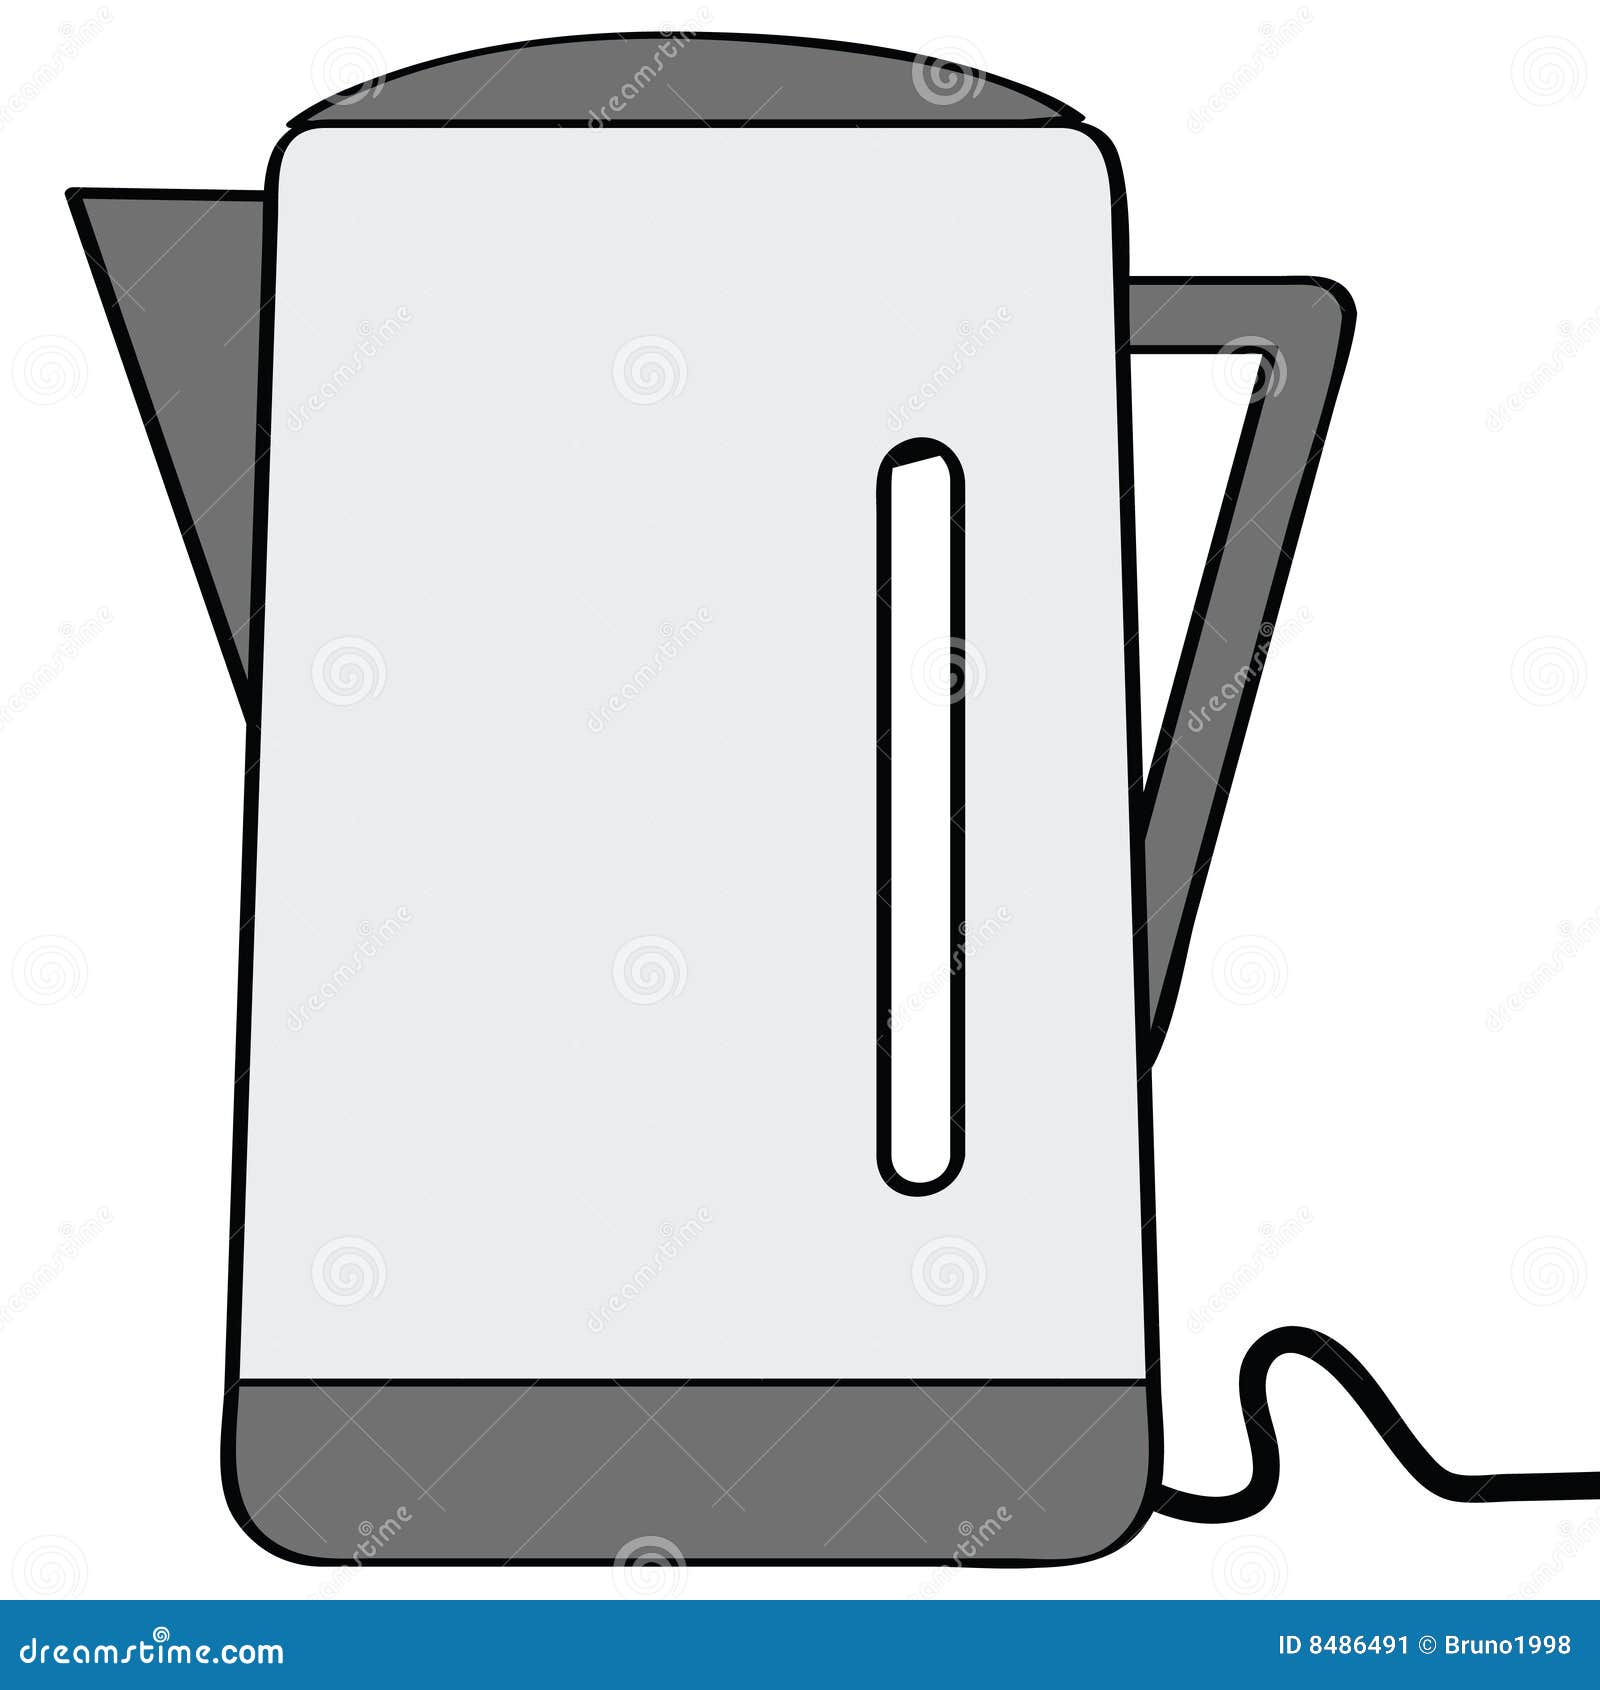 clipart of kettle - photo #47